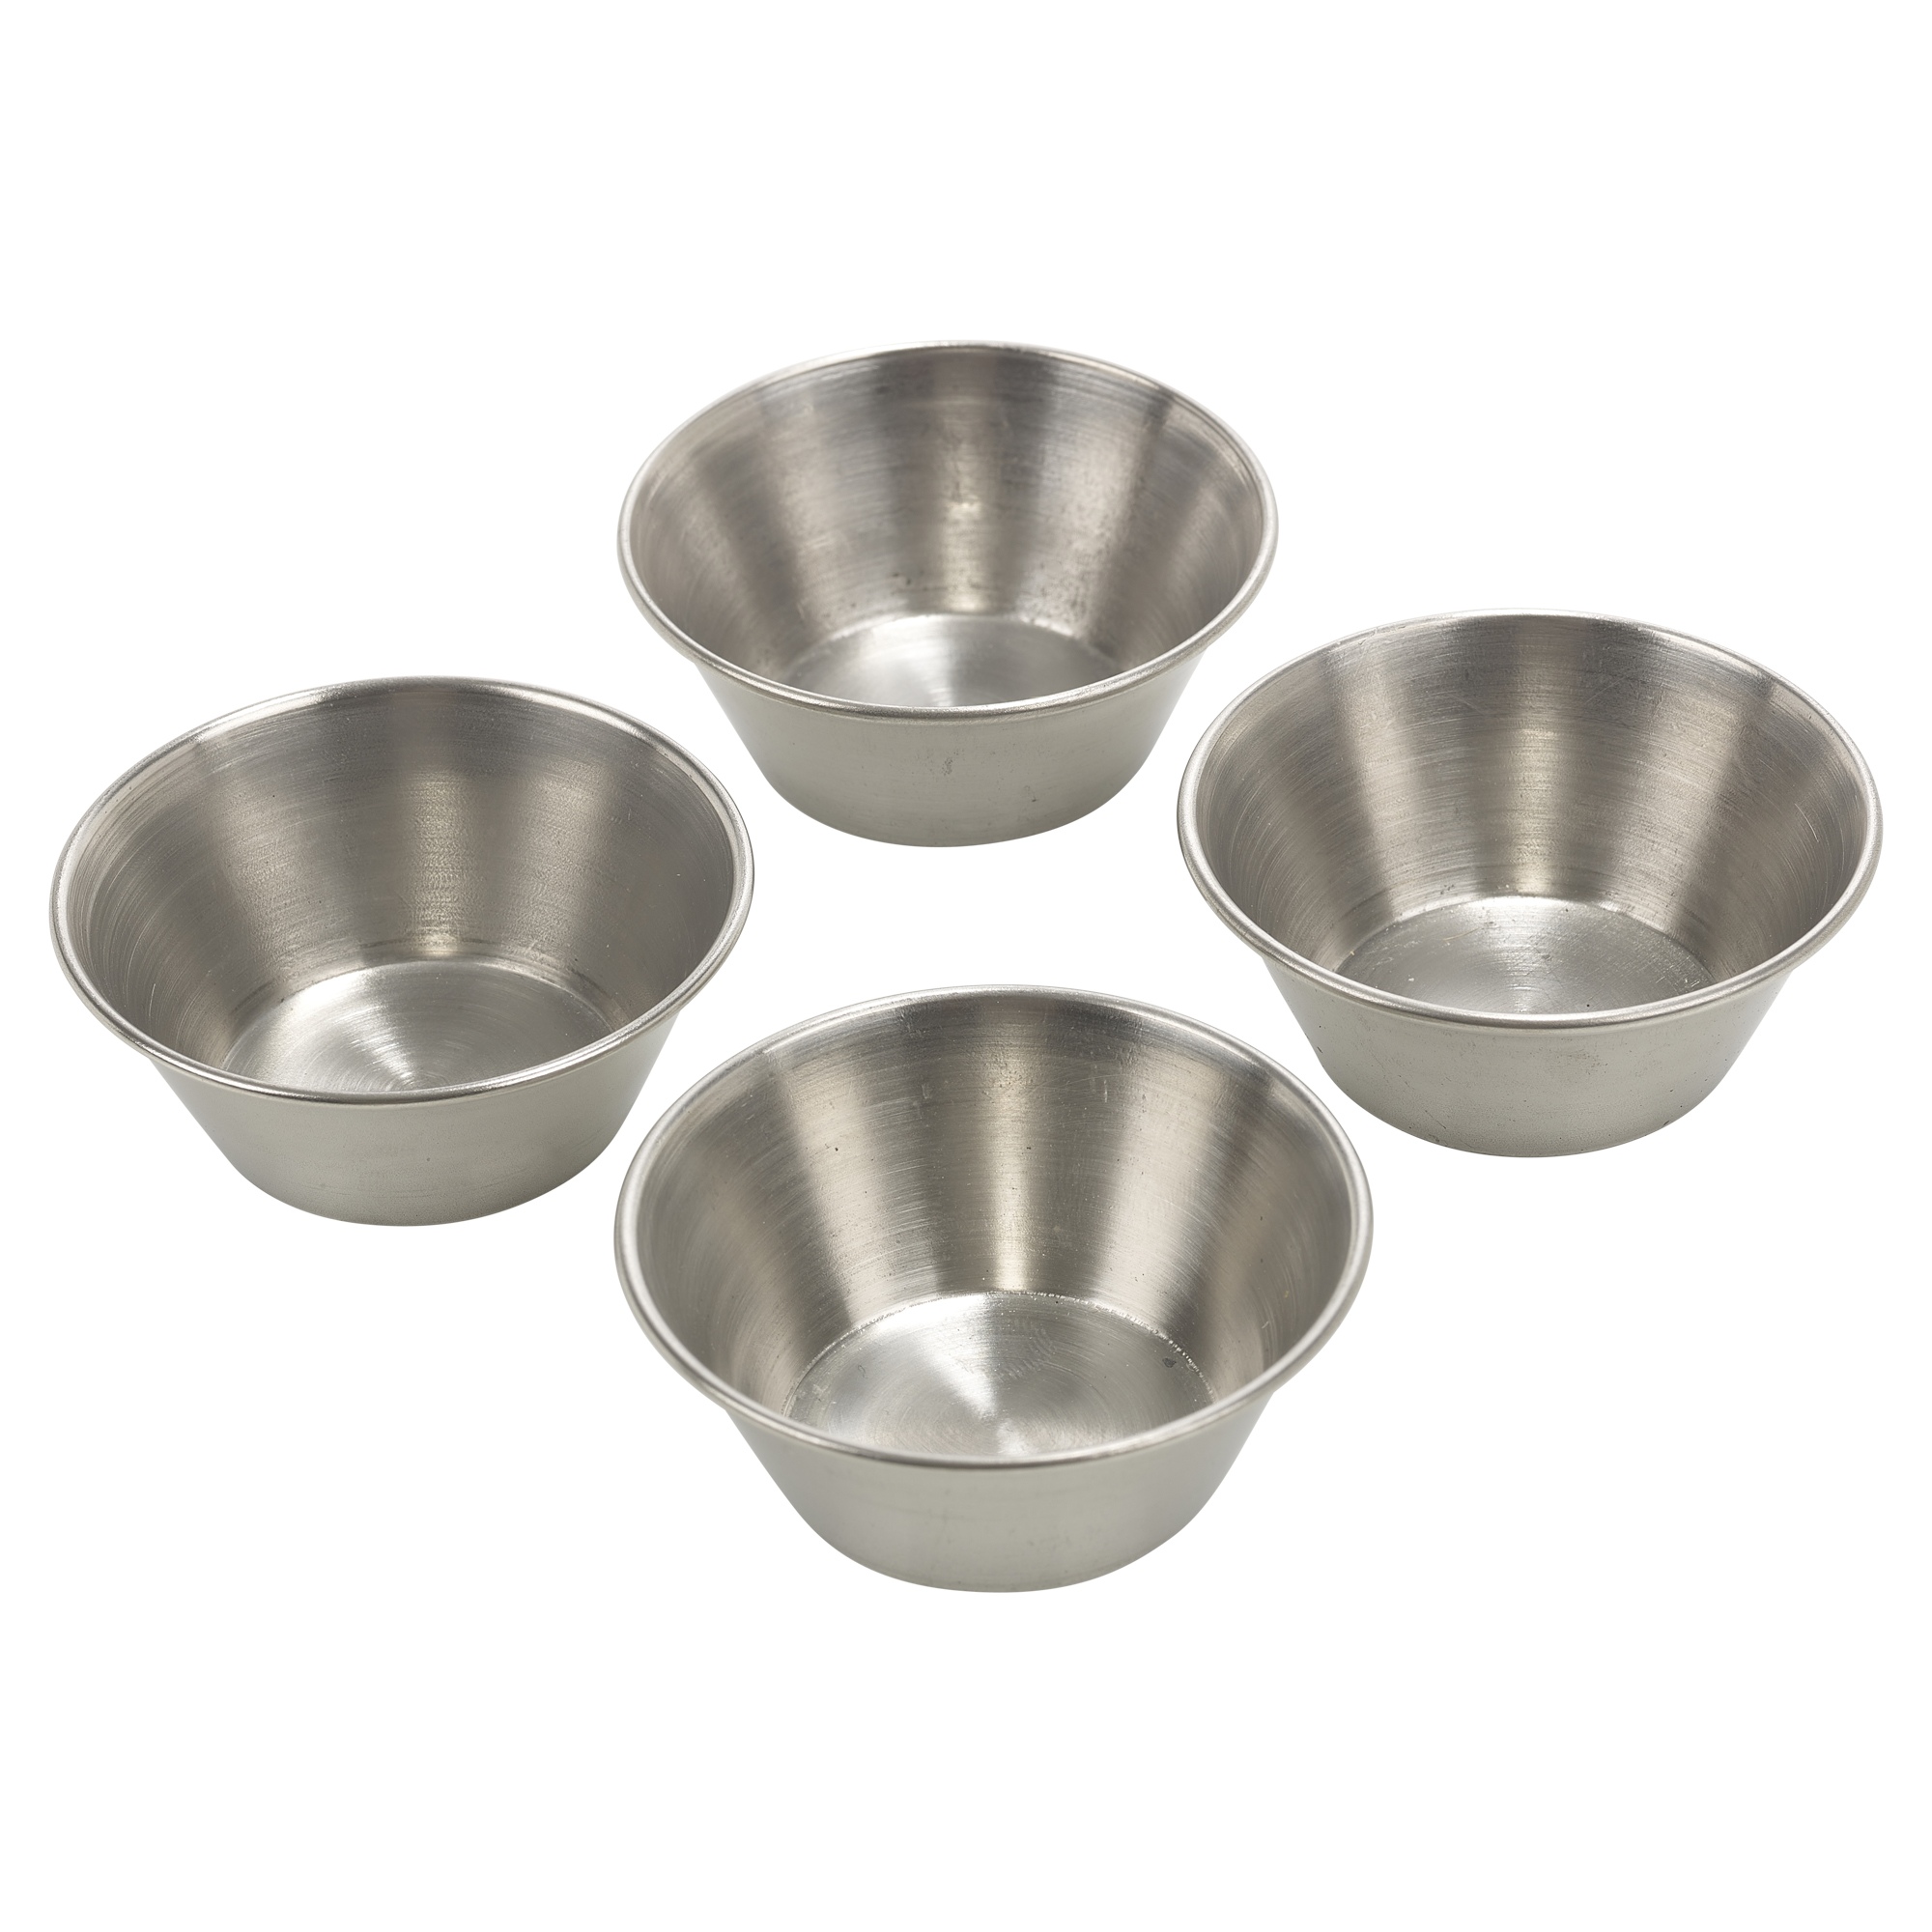 Set Of 12 Small Bowls Made Of Stainless Steel Stackable Metal Serving